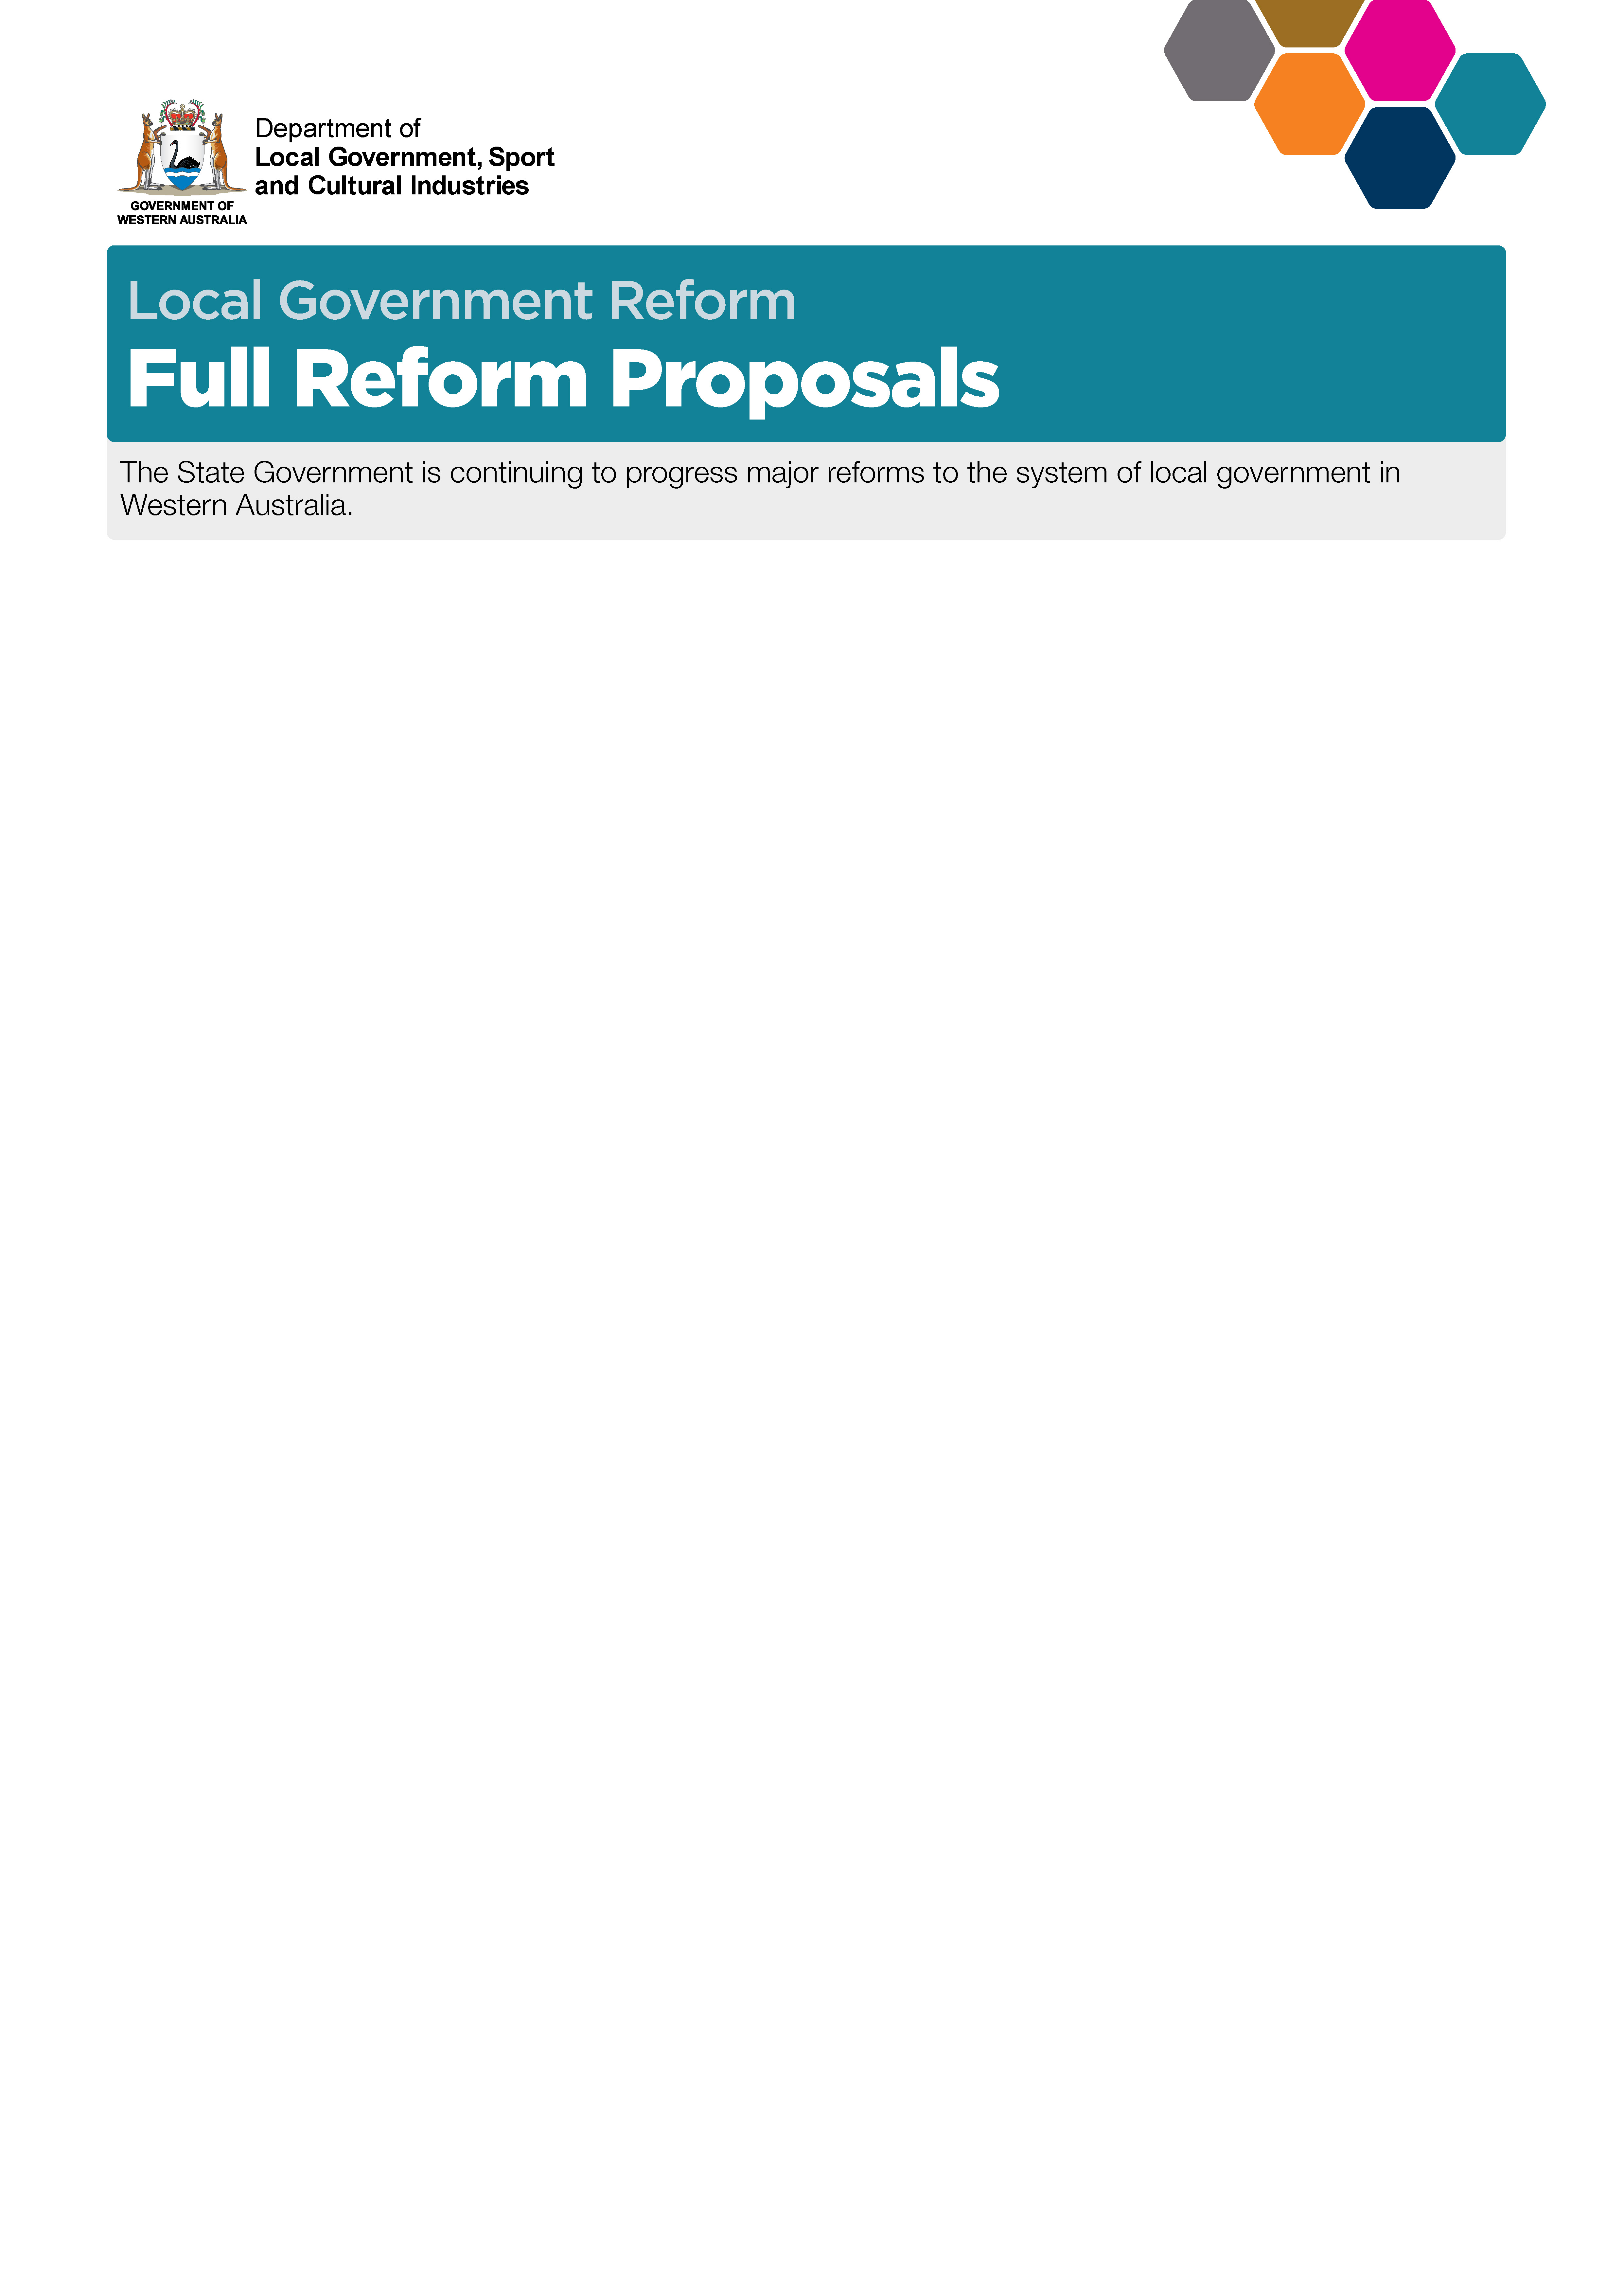 Full Reform Proposals cover